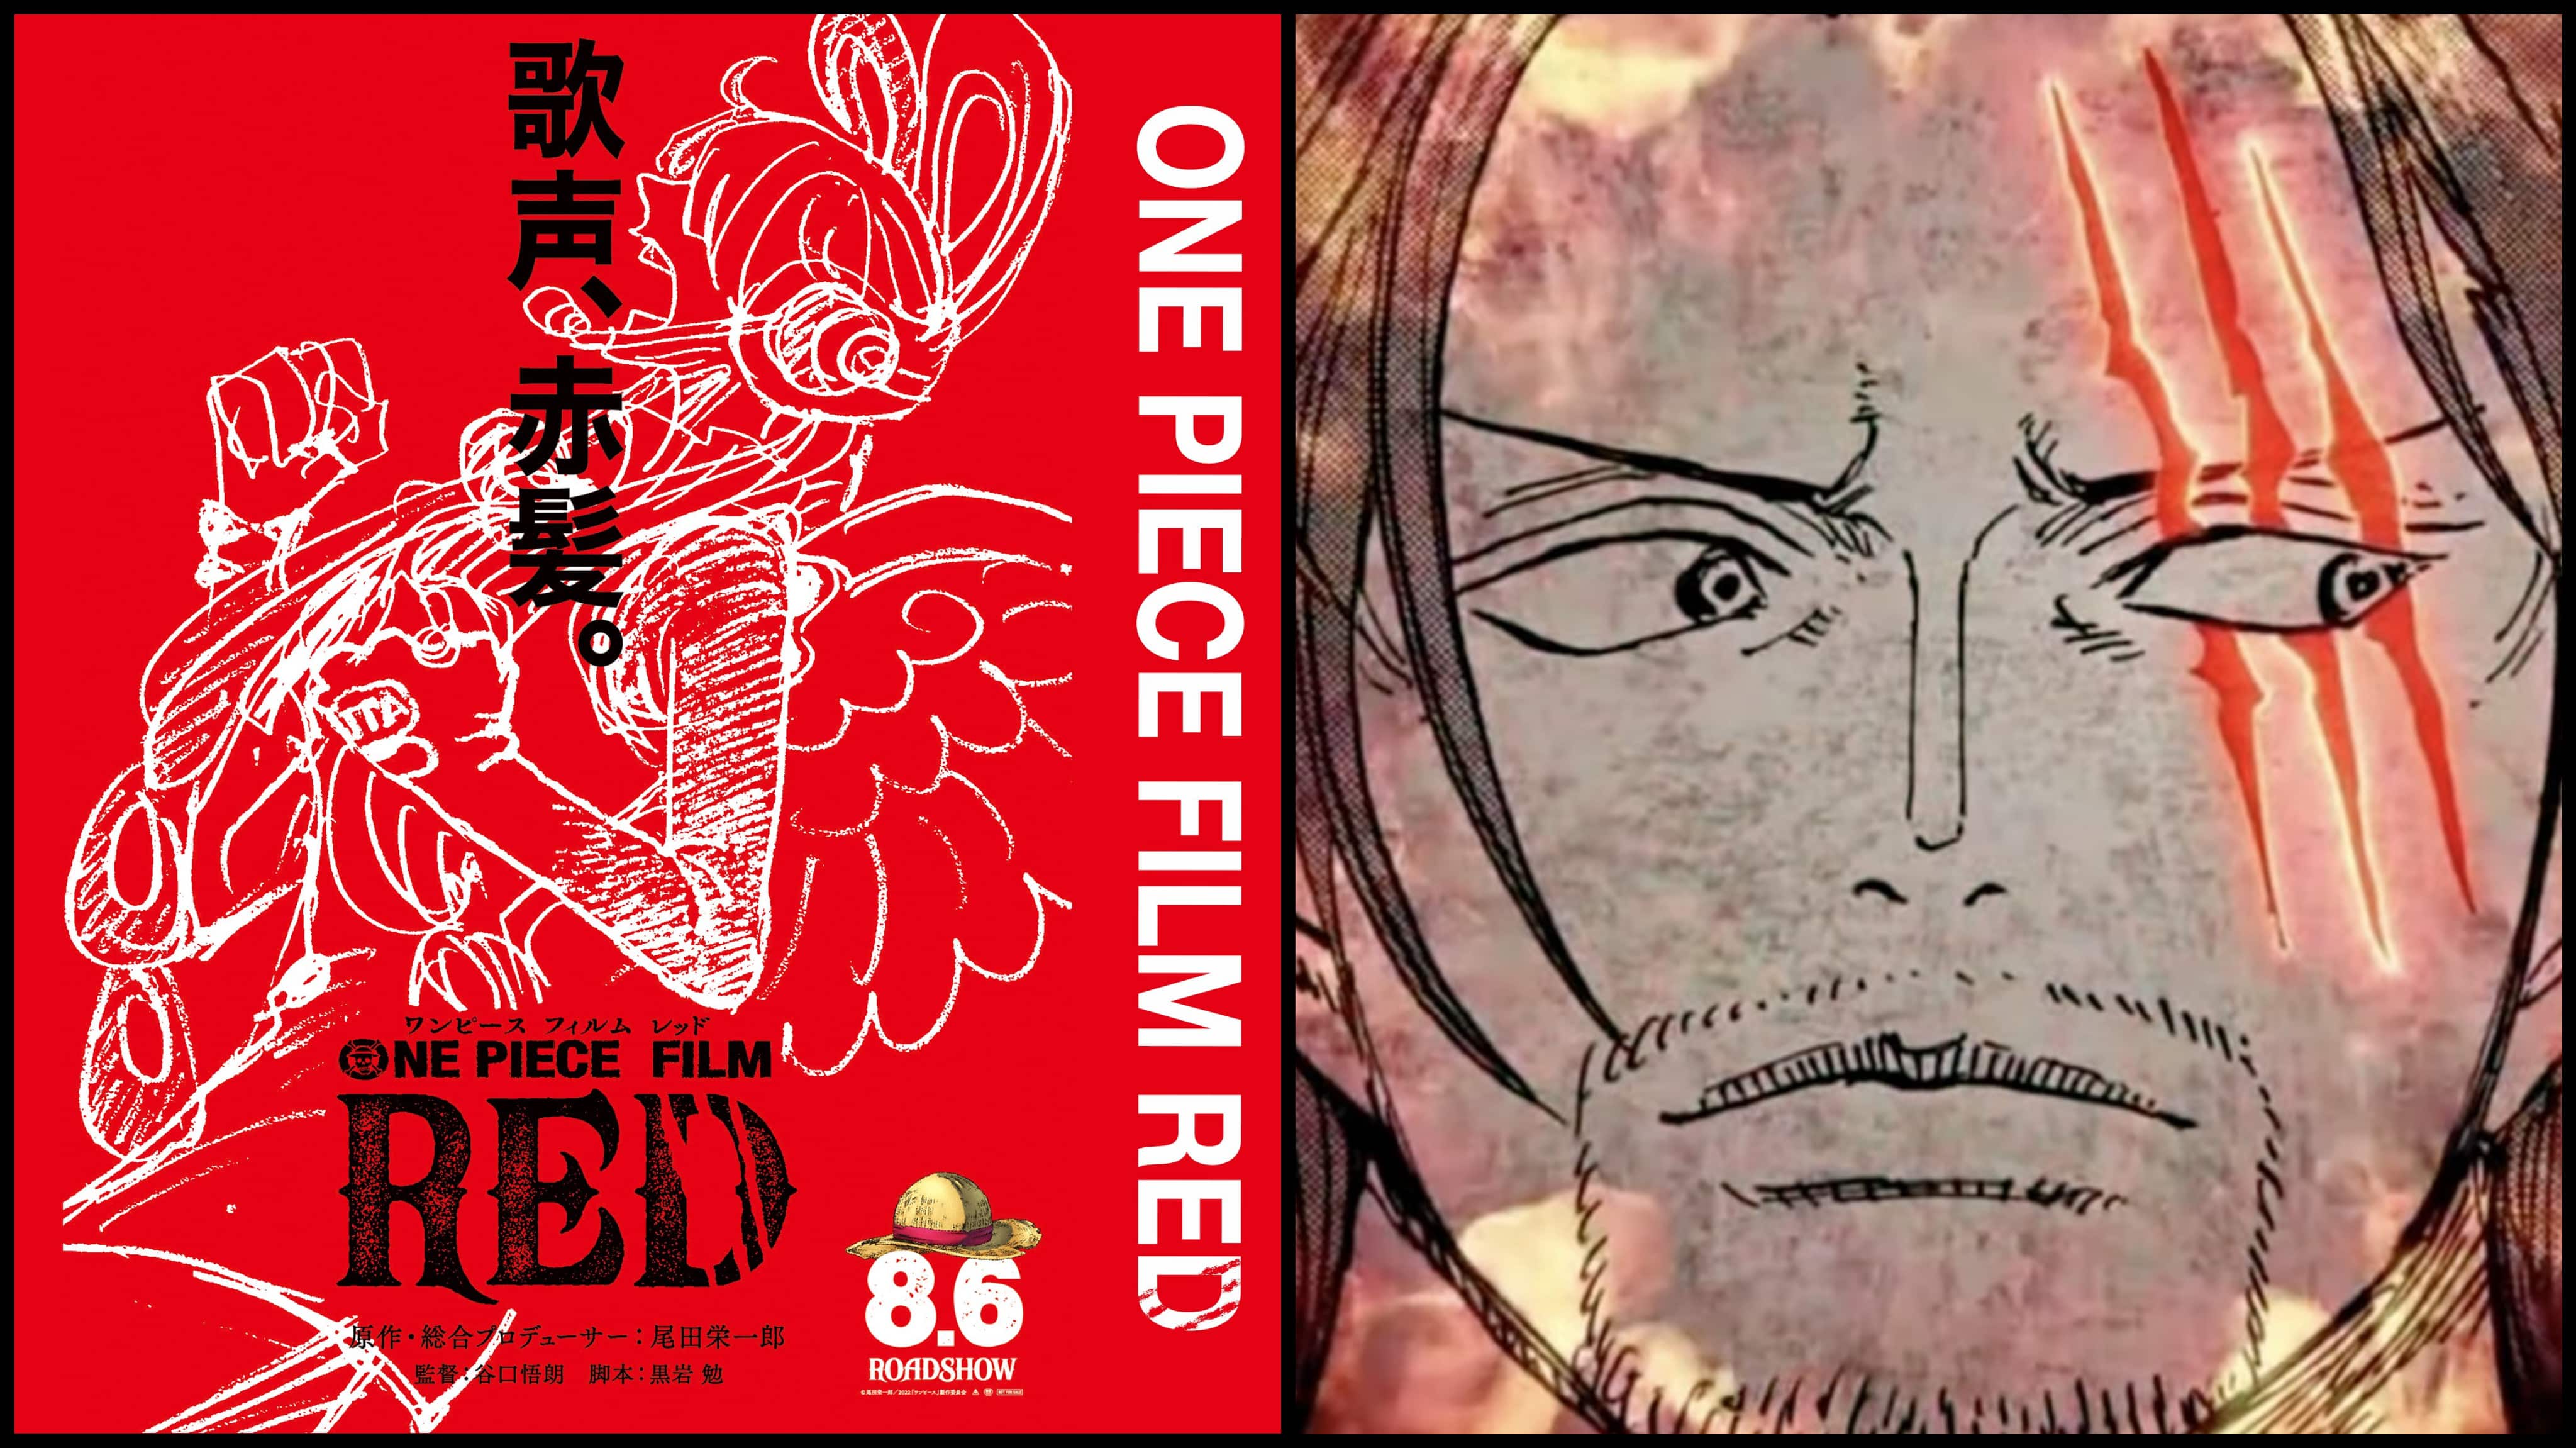 One Piece Red New Film Based On The Popular Anime Releases First Poster And Teaser Trailer